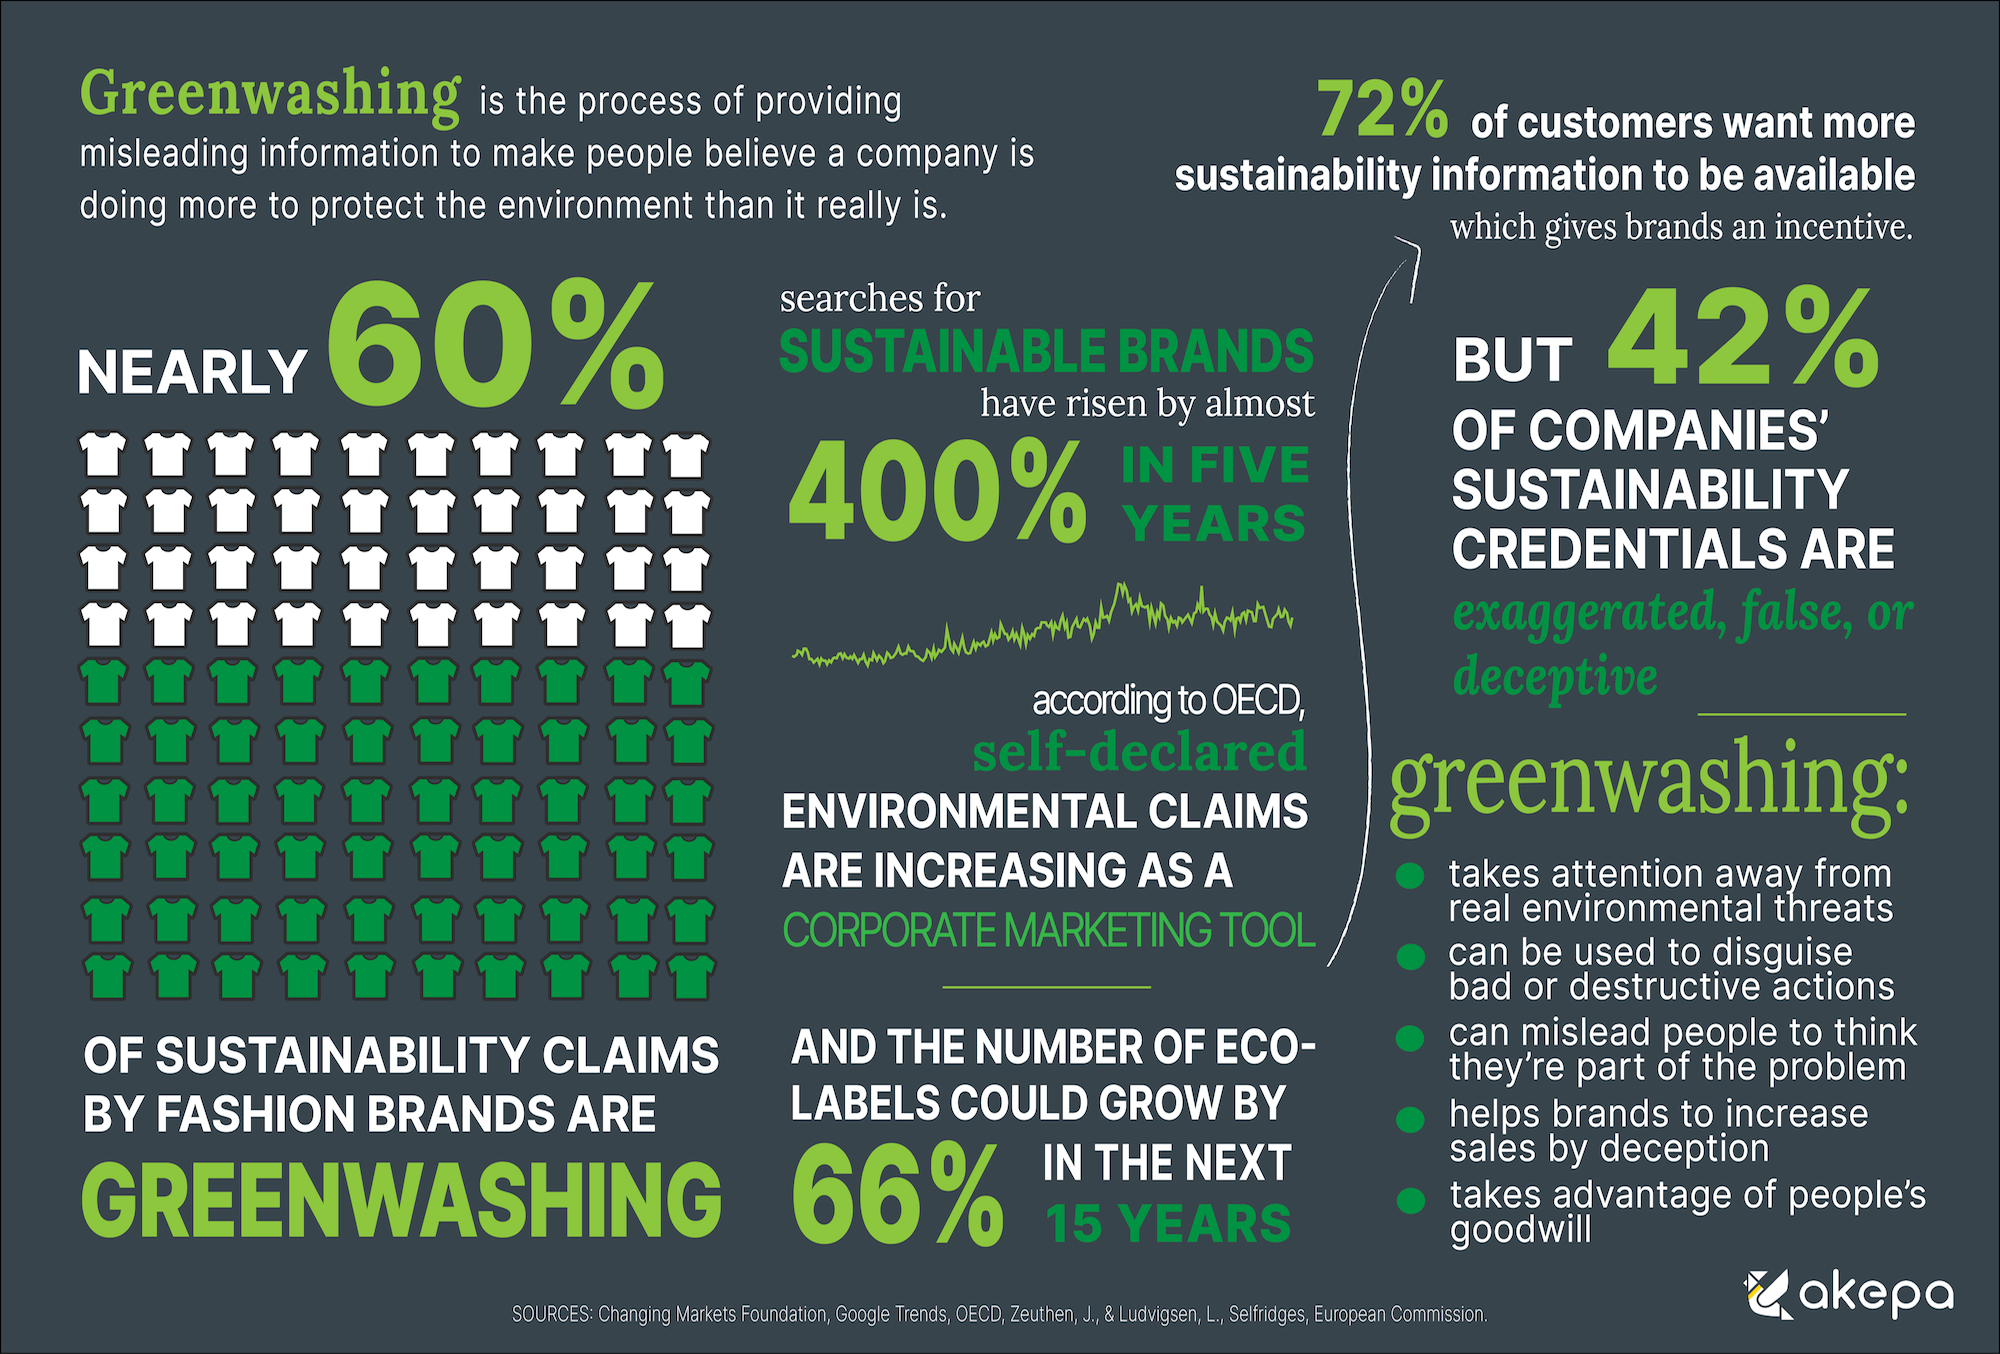 Greenwashing statistics and facts infographic